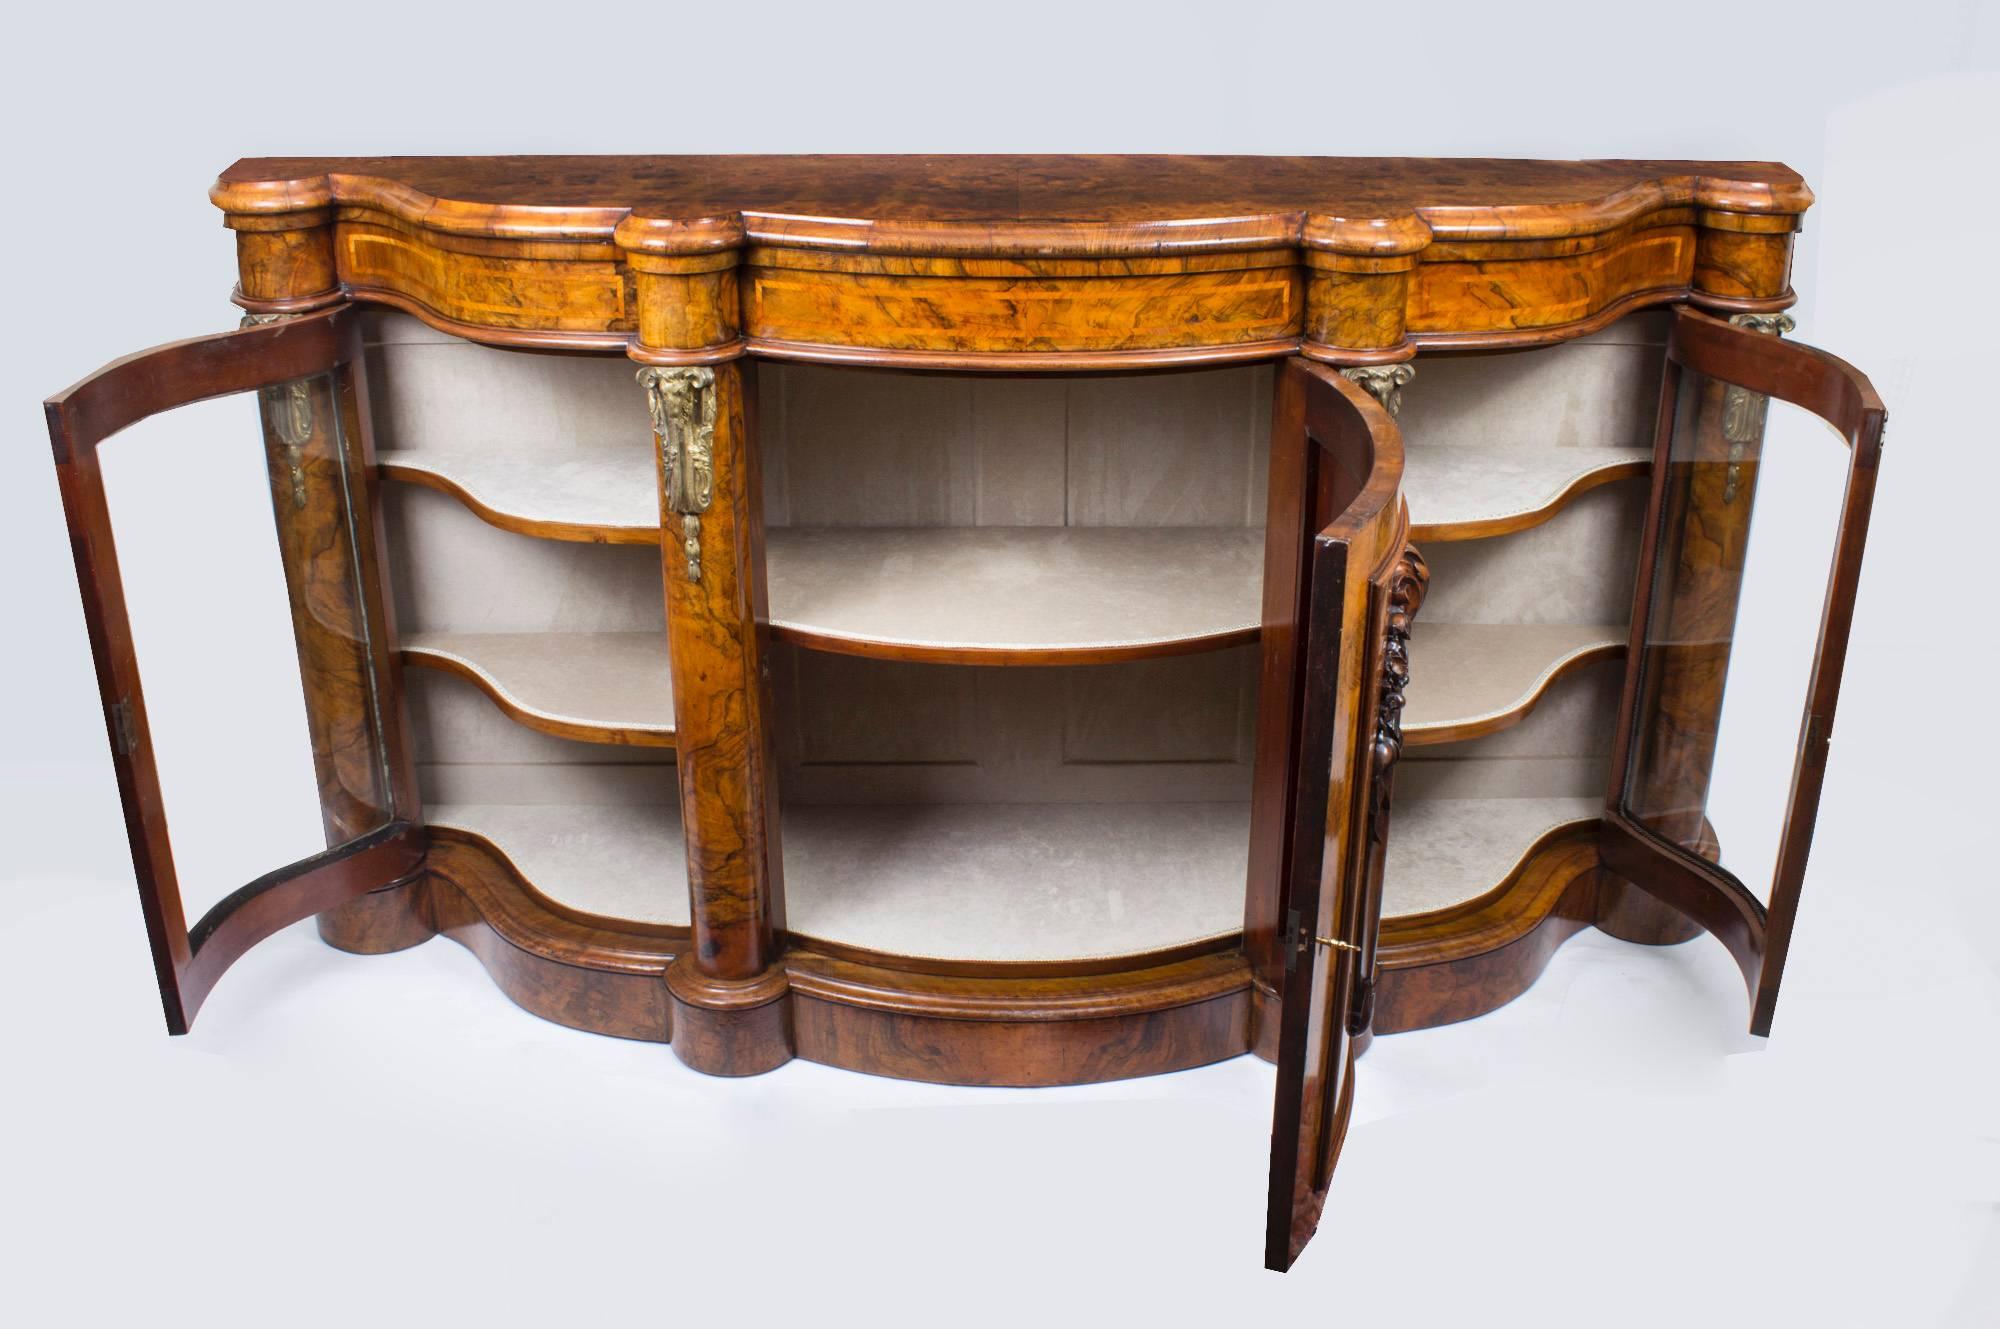 This is a superb antique Victorian burr walnut and marquetry credenza, circa 1860 in date.

Oozing sophistication and charm, this credenza is the absolute epitome of Victorian high society. 

The entire piece highlights the unique and truly